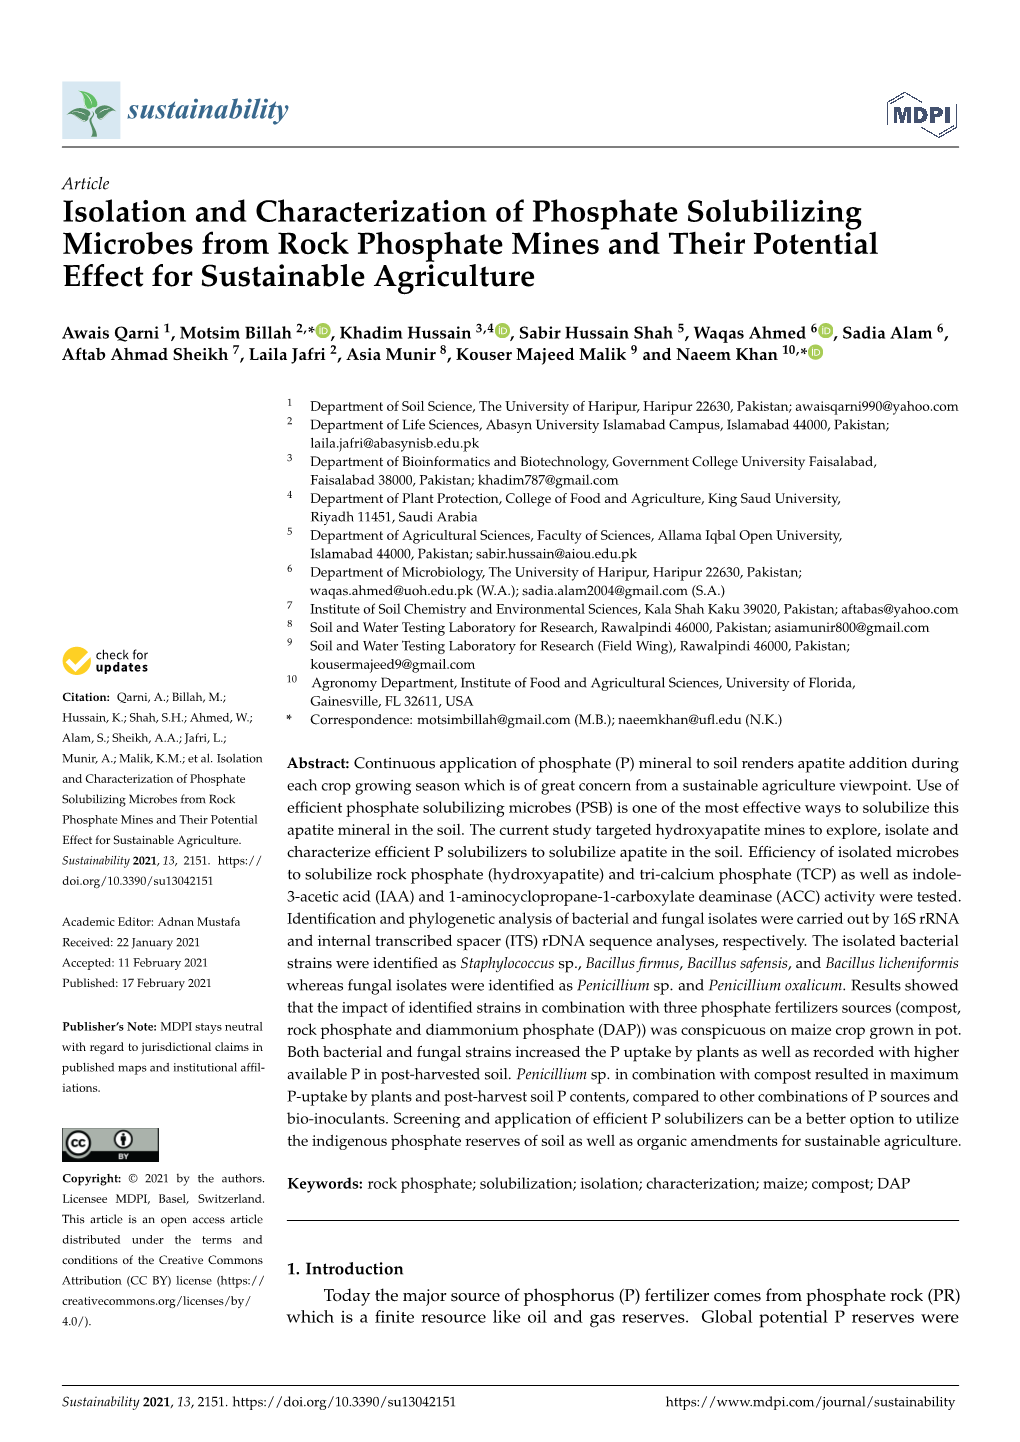 Isolation and Characterization of Phosphate Solubilizing Microbes from Rock Phosphate Mines and Their Potential Effect for Sustainable Agriculture